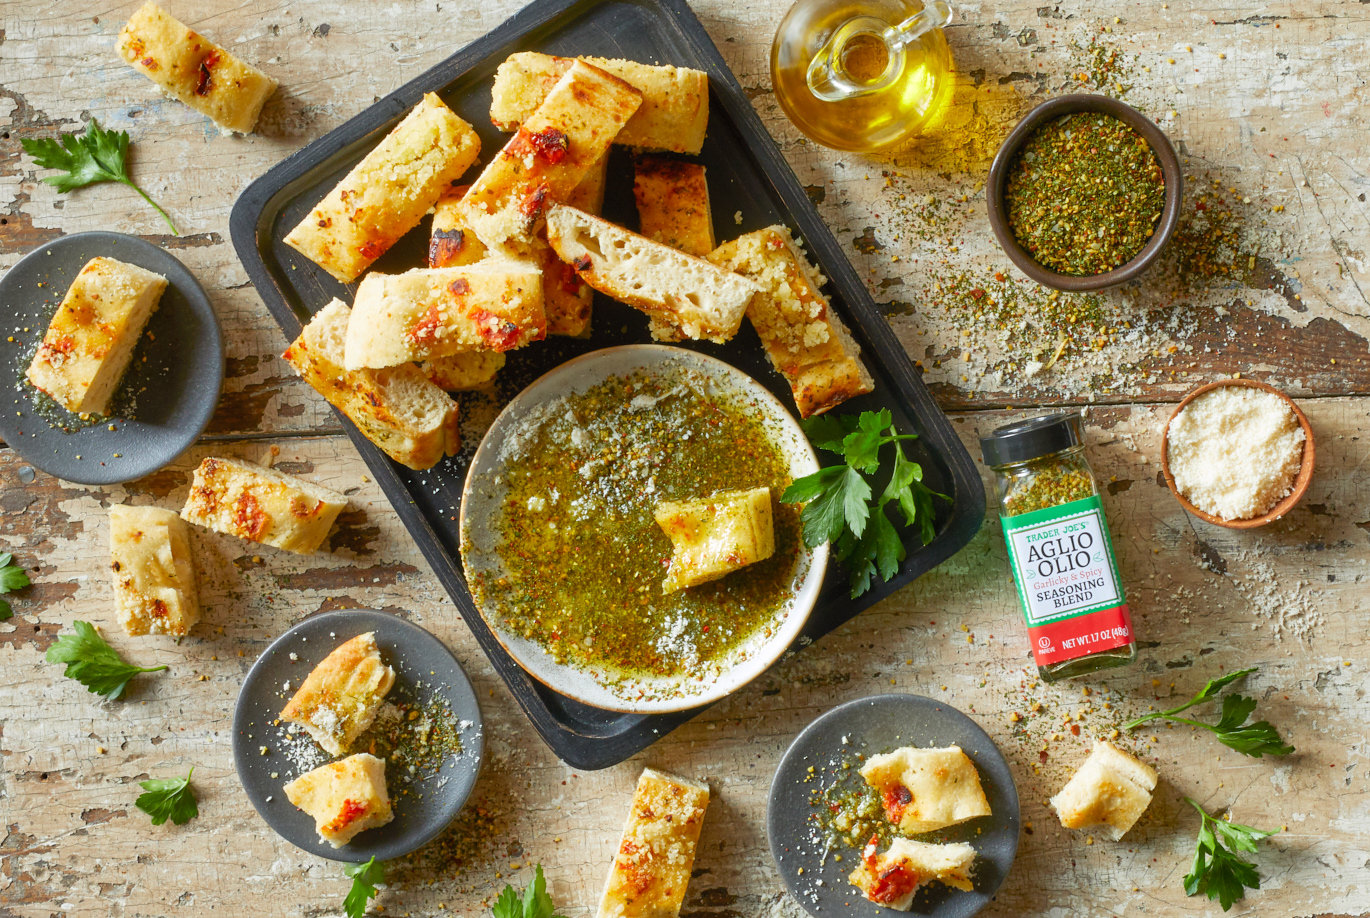 Trader Joe's Aglio Olio Seasoning Blend; used in recipe for Garlicky Parmesan Spice Dip; in small dish with oilive oil and slices of focaccia bread; several small plates with bread and dip; spices surrounding